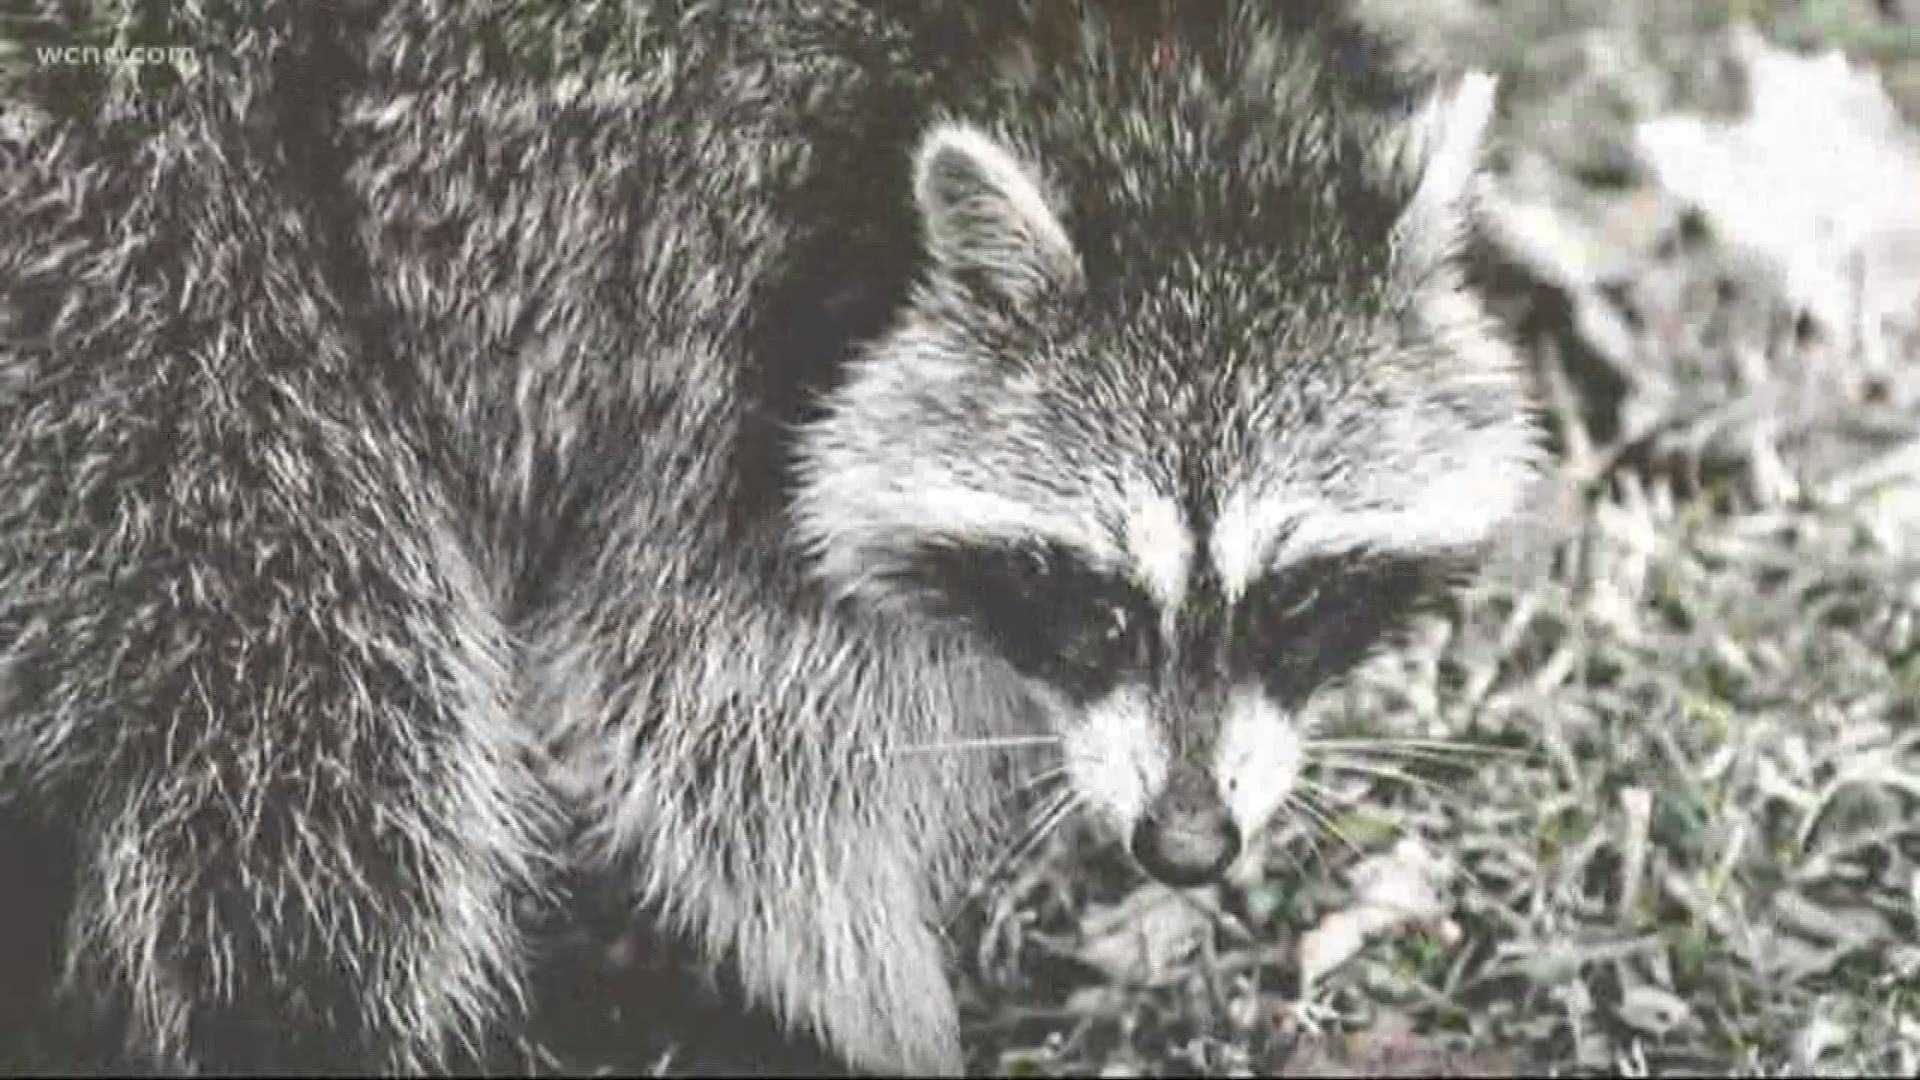 According to officials, this is the 8th animal in Mecklenburg County this year to test positive for rabies.